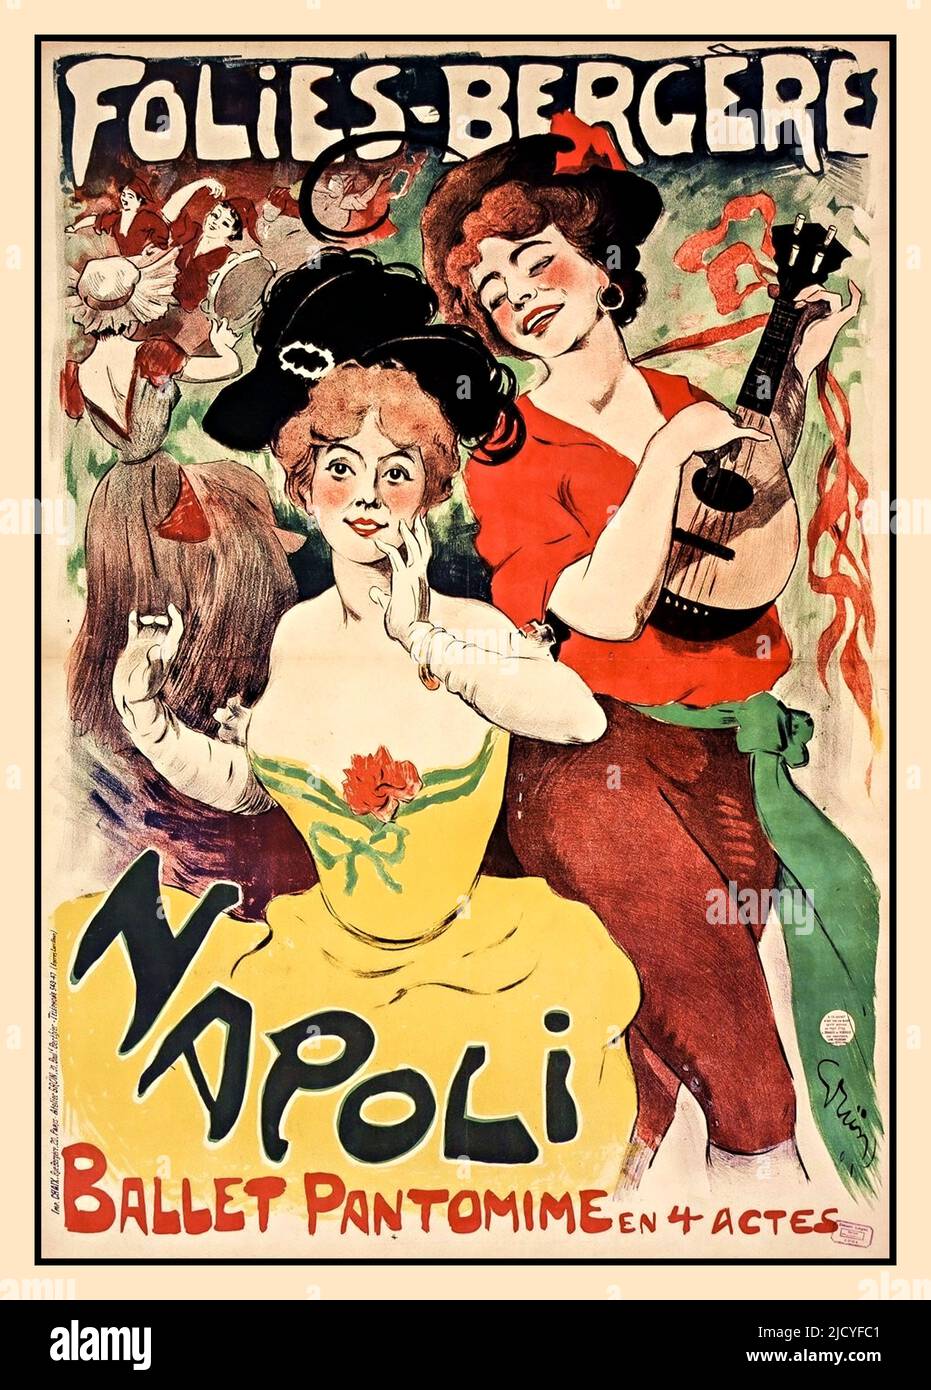 Vintage Folies Bergere Poster. 1900s  Amélie Diéterle plays the role of La parisienne in Napoli at the Folies Bergère in 1901, a ballet of Paul Milliet with music by Franco Alfano. Amélie Diéterle is a French actress born in Strasbourg on February 20, 1871 and died in Cannes on January 20, 1941. She was legitimated in Paris in 1892 by Captain Louis Laurent, Knight of the Legion of Honor. Amélie Diéterle married in Vallauris on June 16th, 1930 with André Simon (1877-1965). Amélie Diéterle played mainly at the Théâtre des Variétés in Paris during the Belle Époque. Paris France 1901 Stock Photo